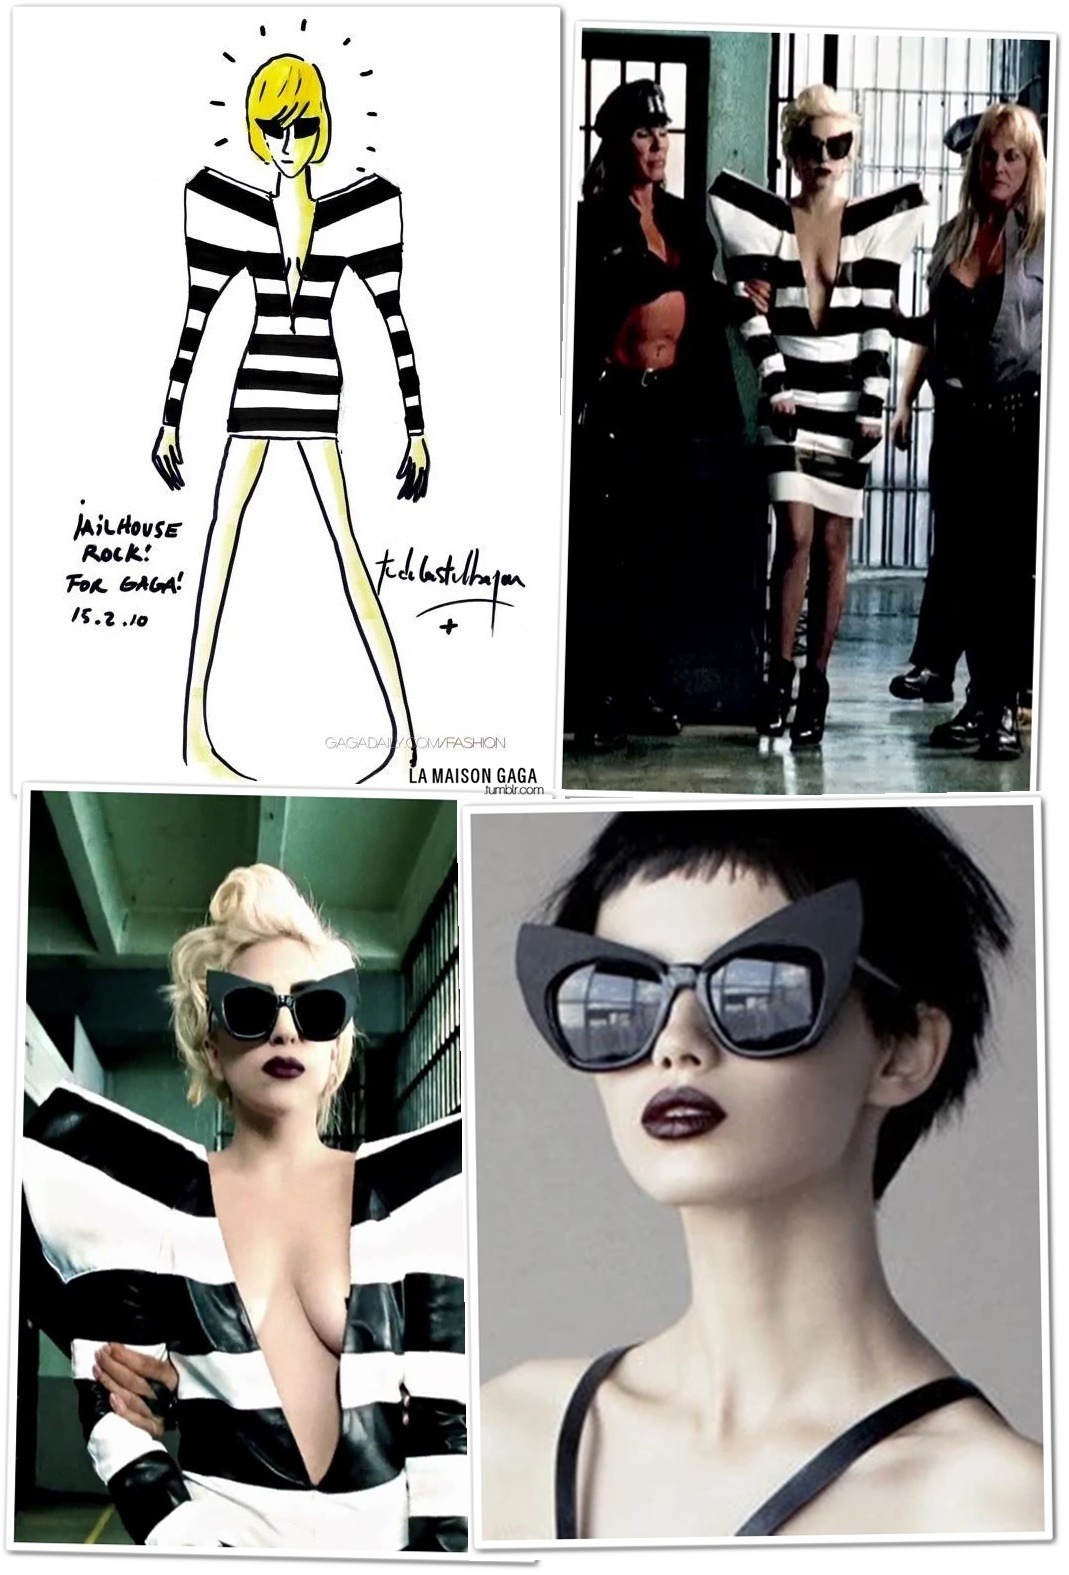 Lady Gaga's Most Iconic Outfits